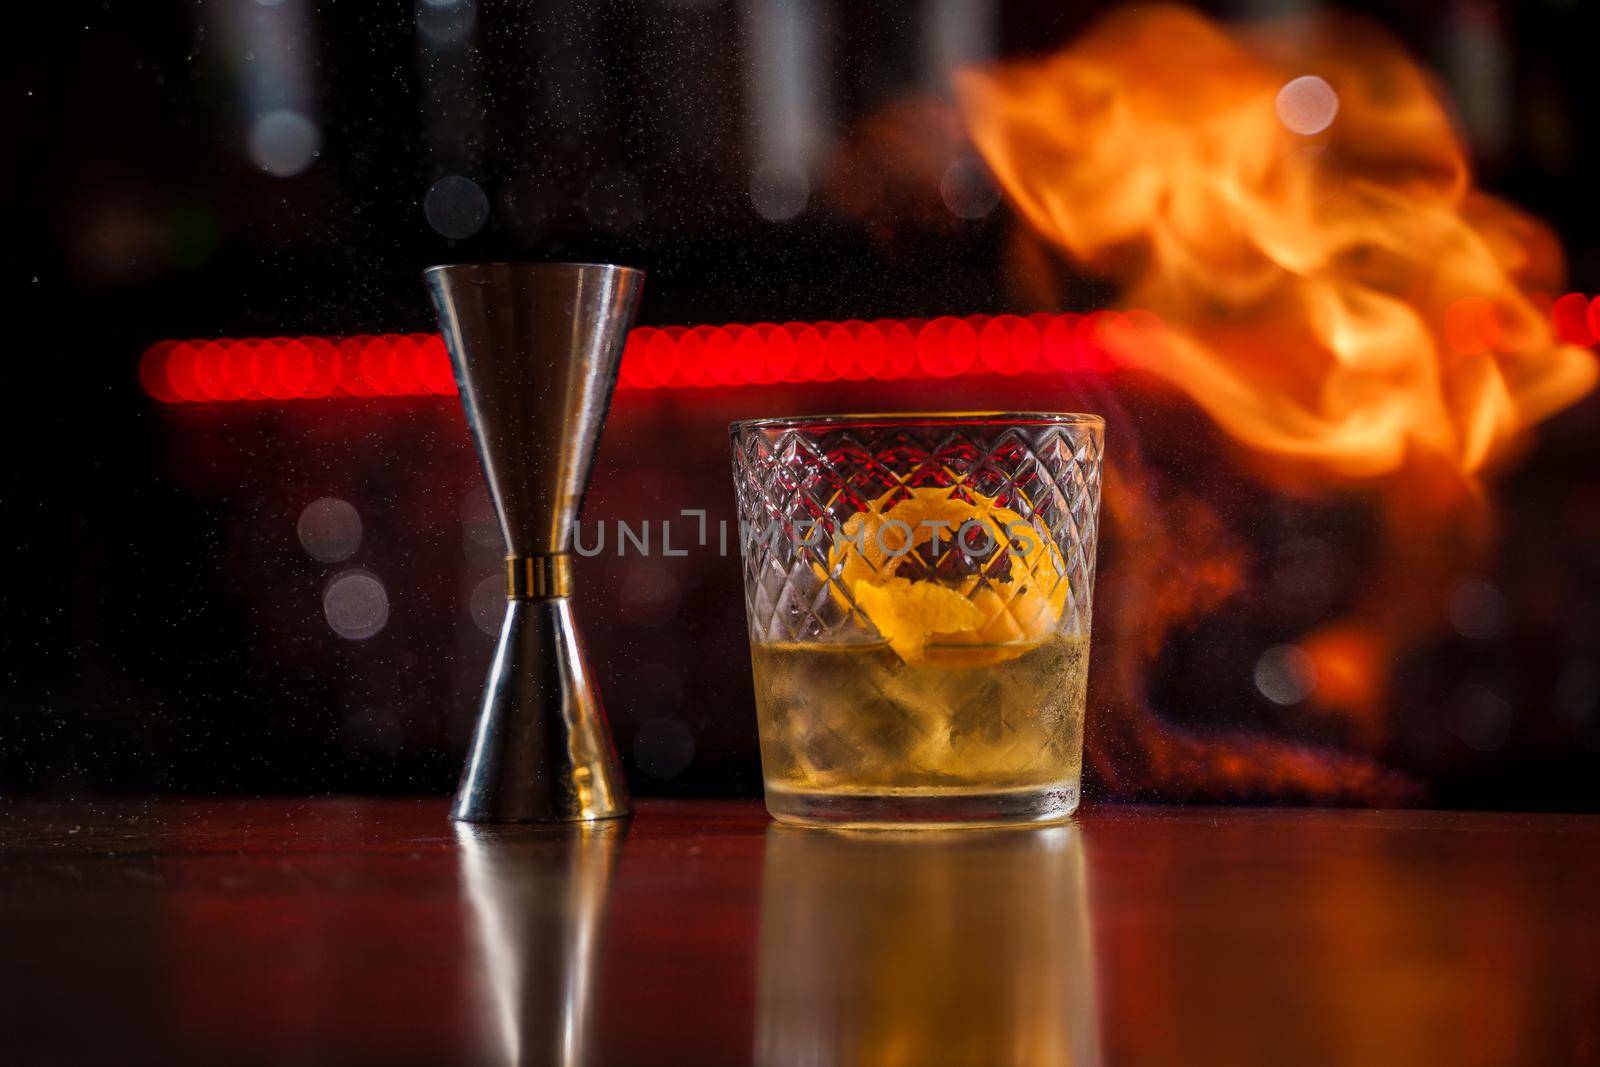 The bartender makes flame over a cocktail with orange peel close up.